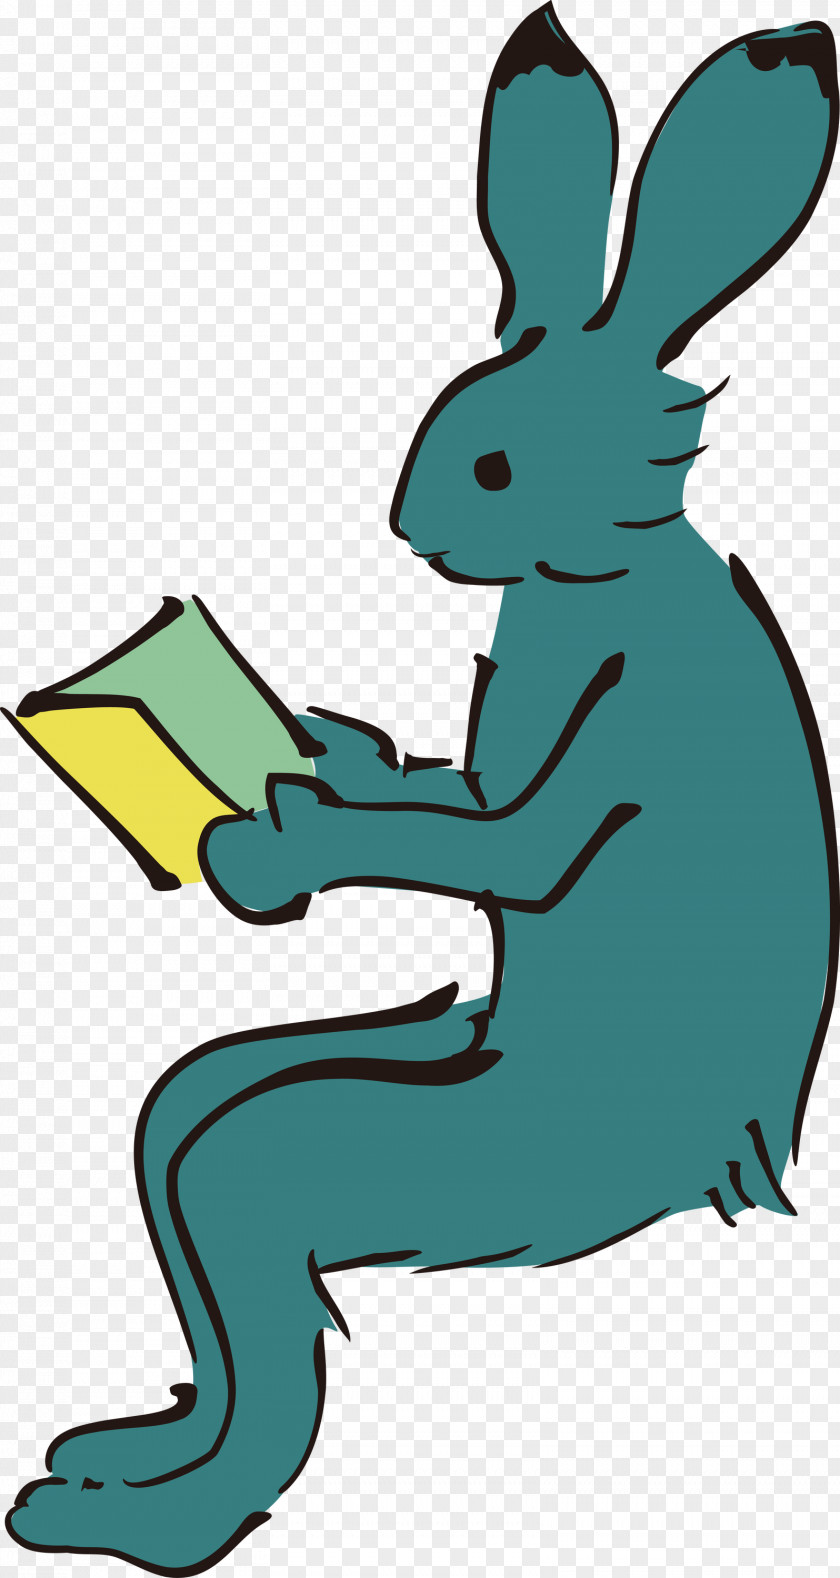 Reading Book Rabbit PNG